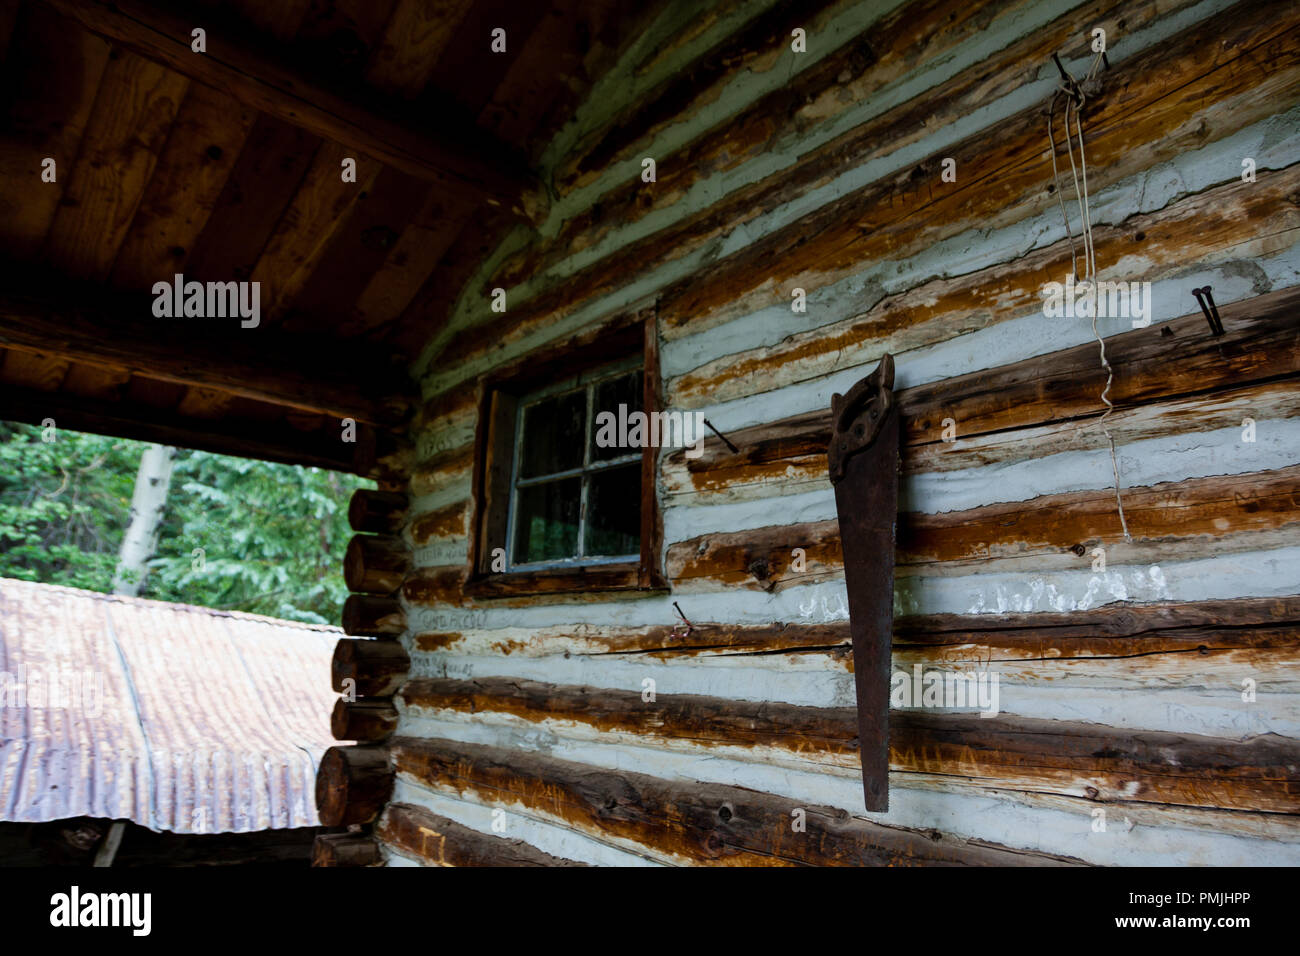 A log cabin in the San Juan National Forest serves as a shelter for those hiking in the forest or in need of emergency shelter. Stock Photo